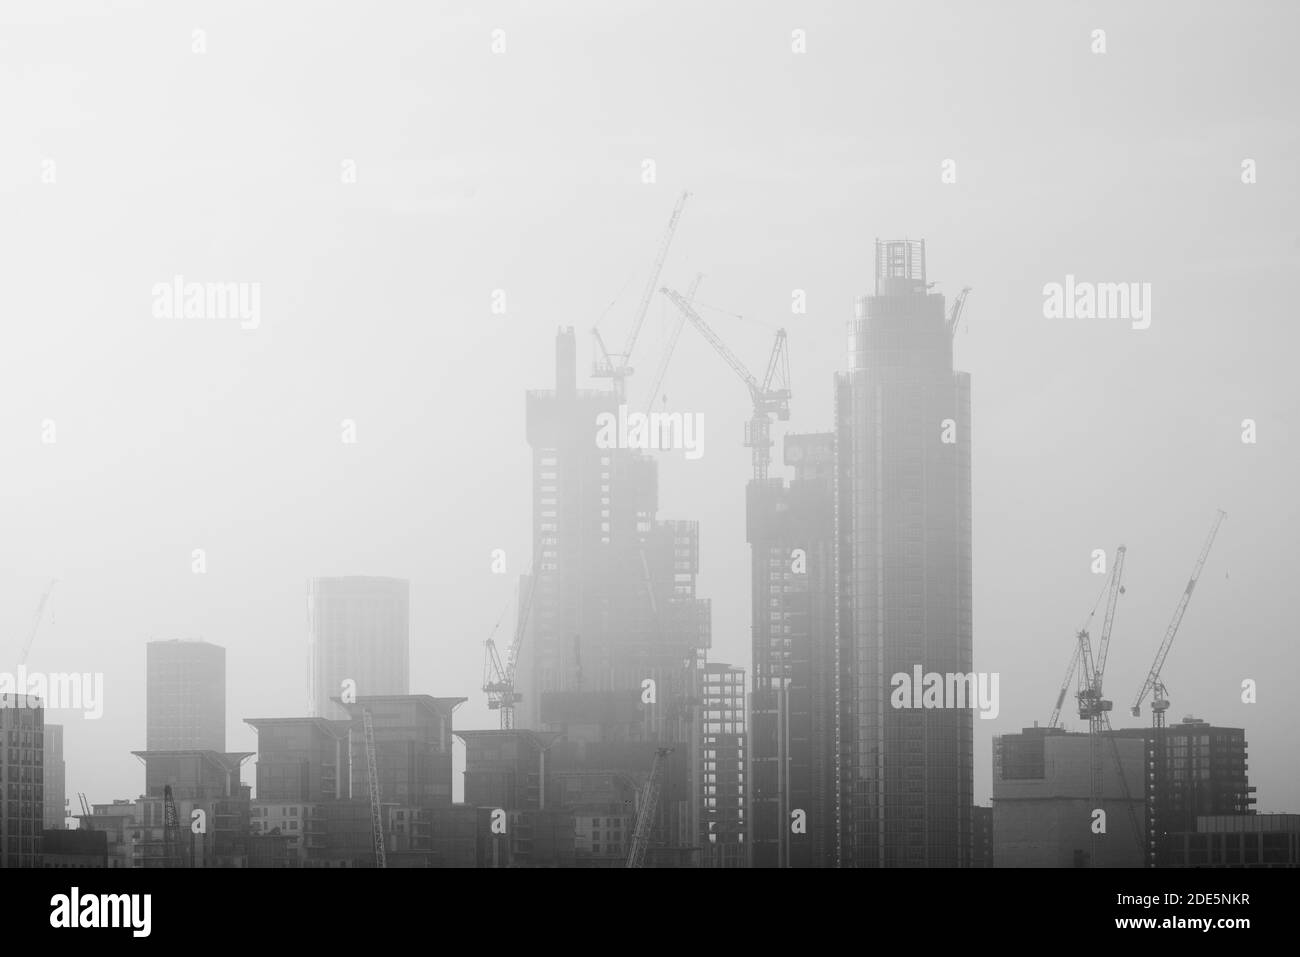 Construction background with copy space in black and white, London cityscape background with tall skyscrapers and office blocks and misty city buildings, England, UK, Europe Stock Photo